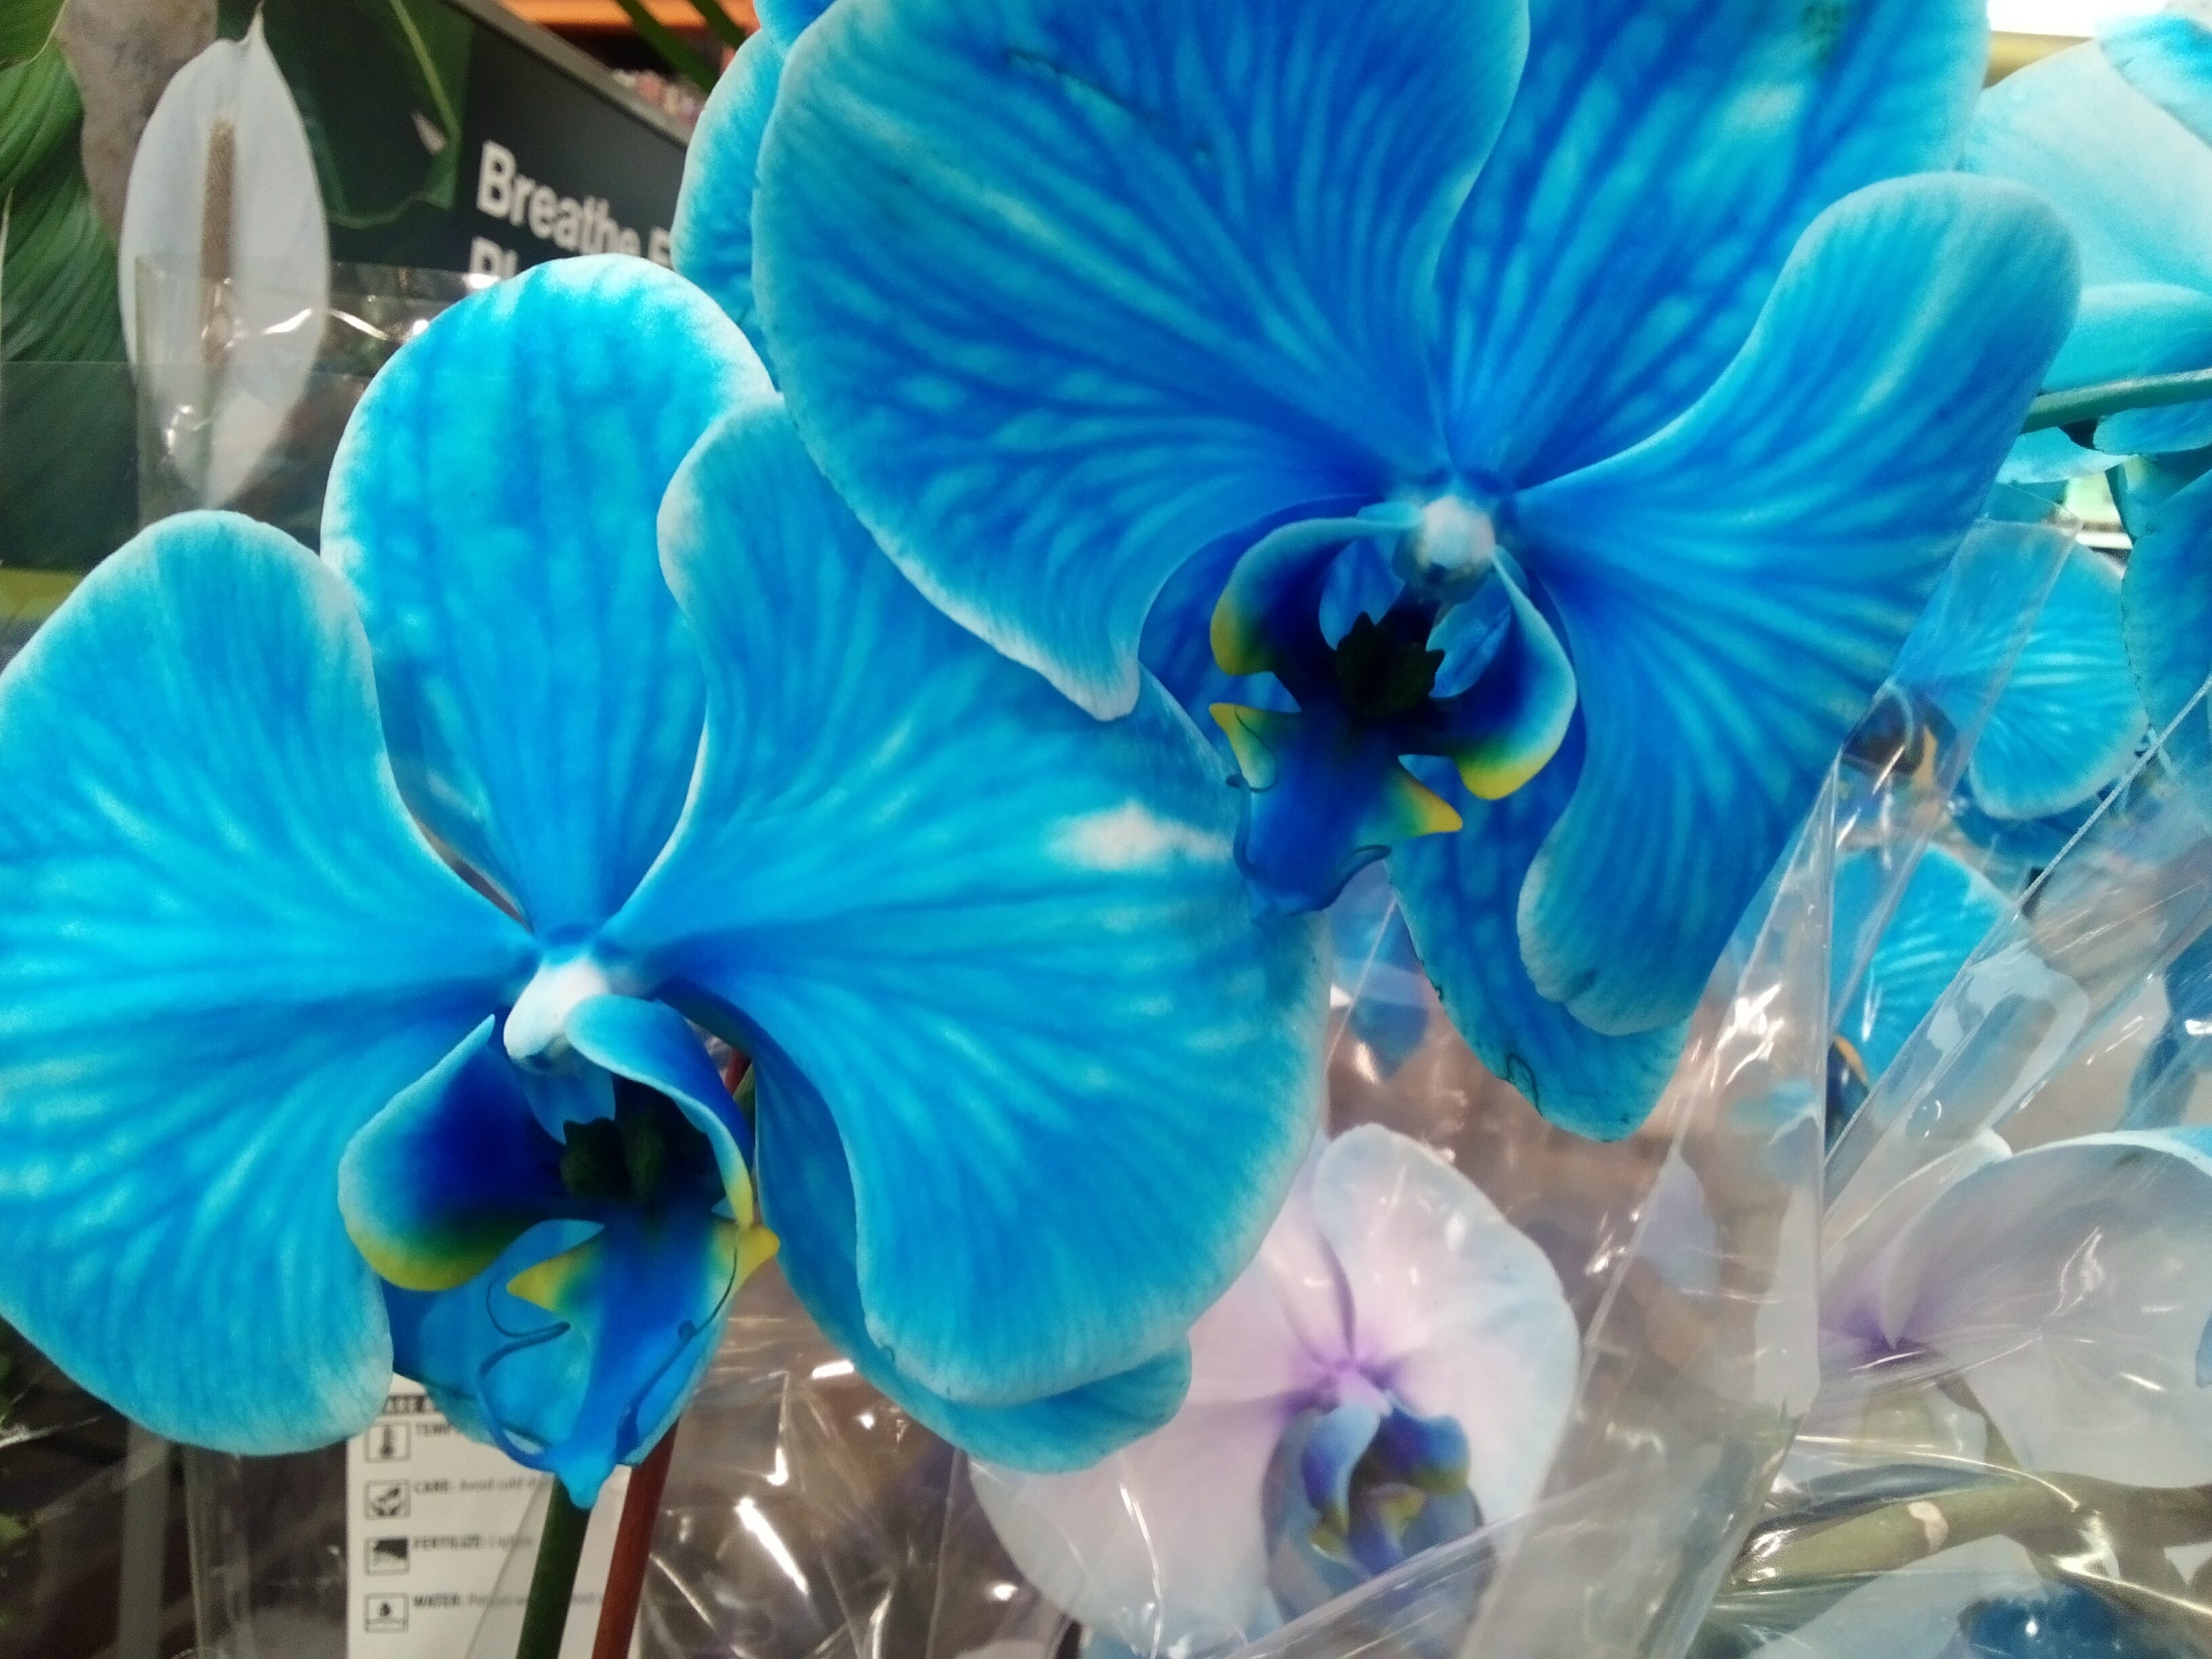 I Found The Rare Blue Orchid. It's the oldest flower in existence